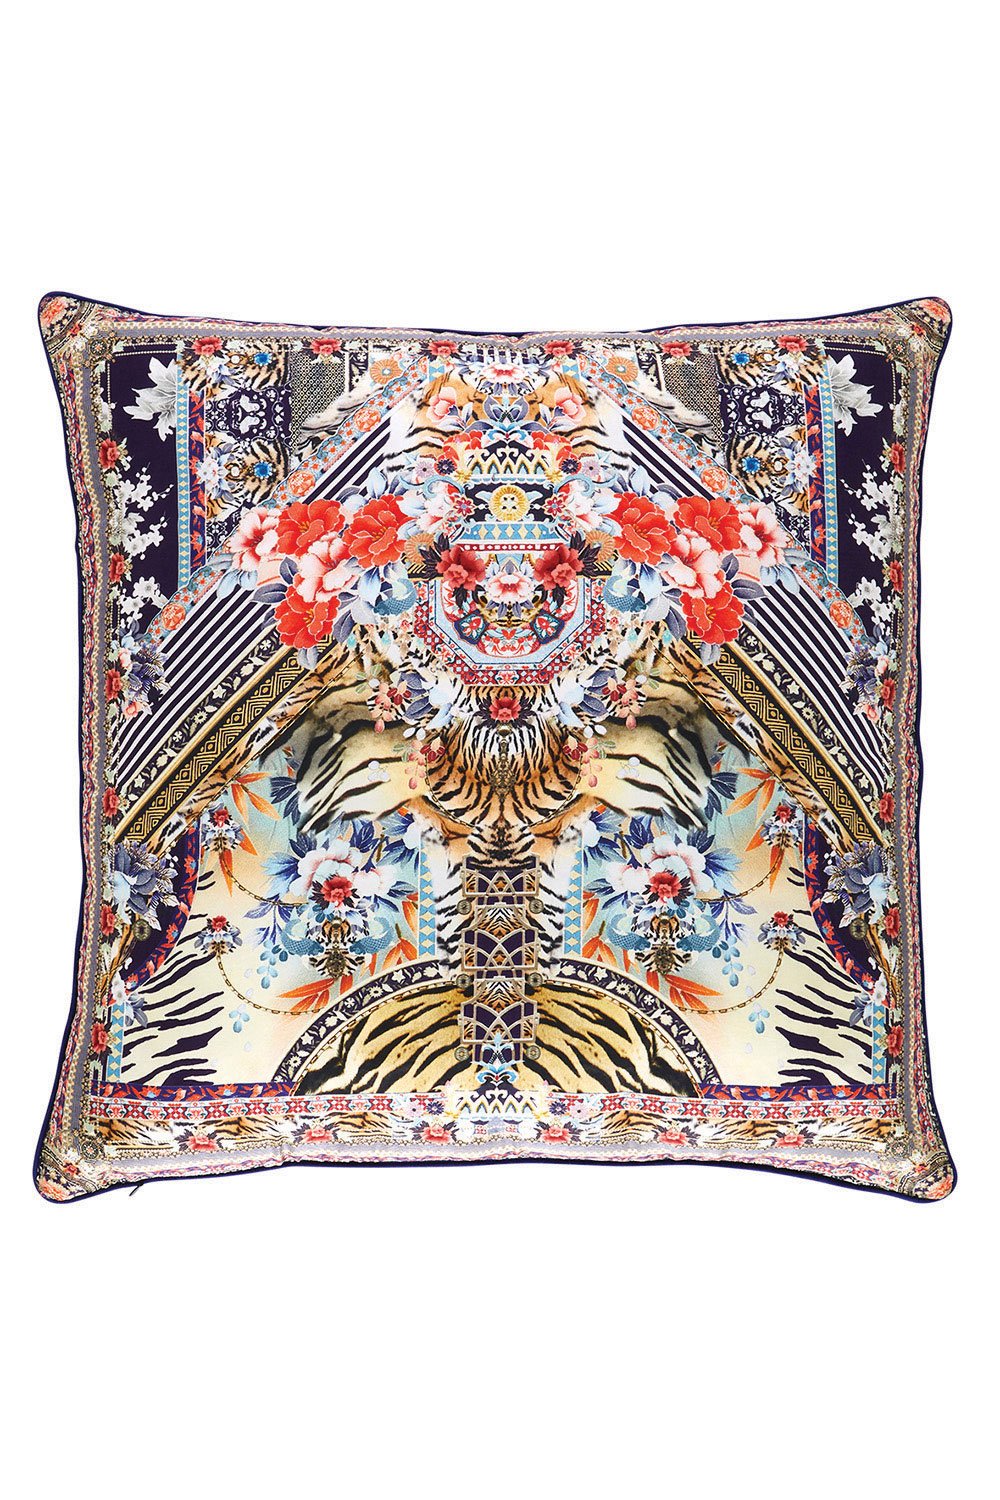 CAMILLA THE LONELY WILD LARGE SQUARE CUSHION